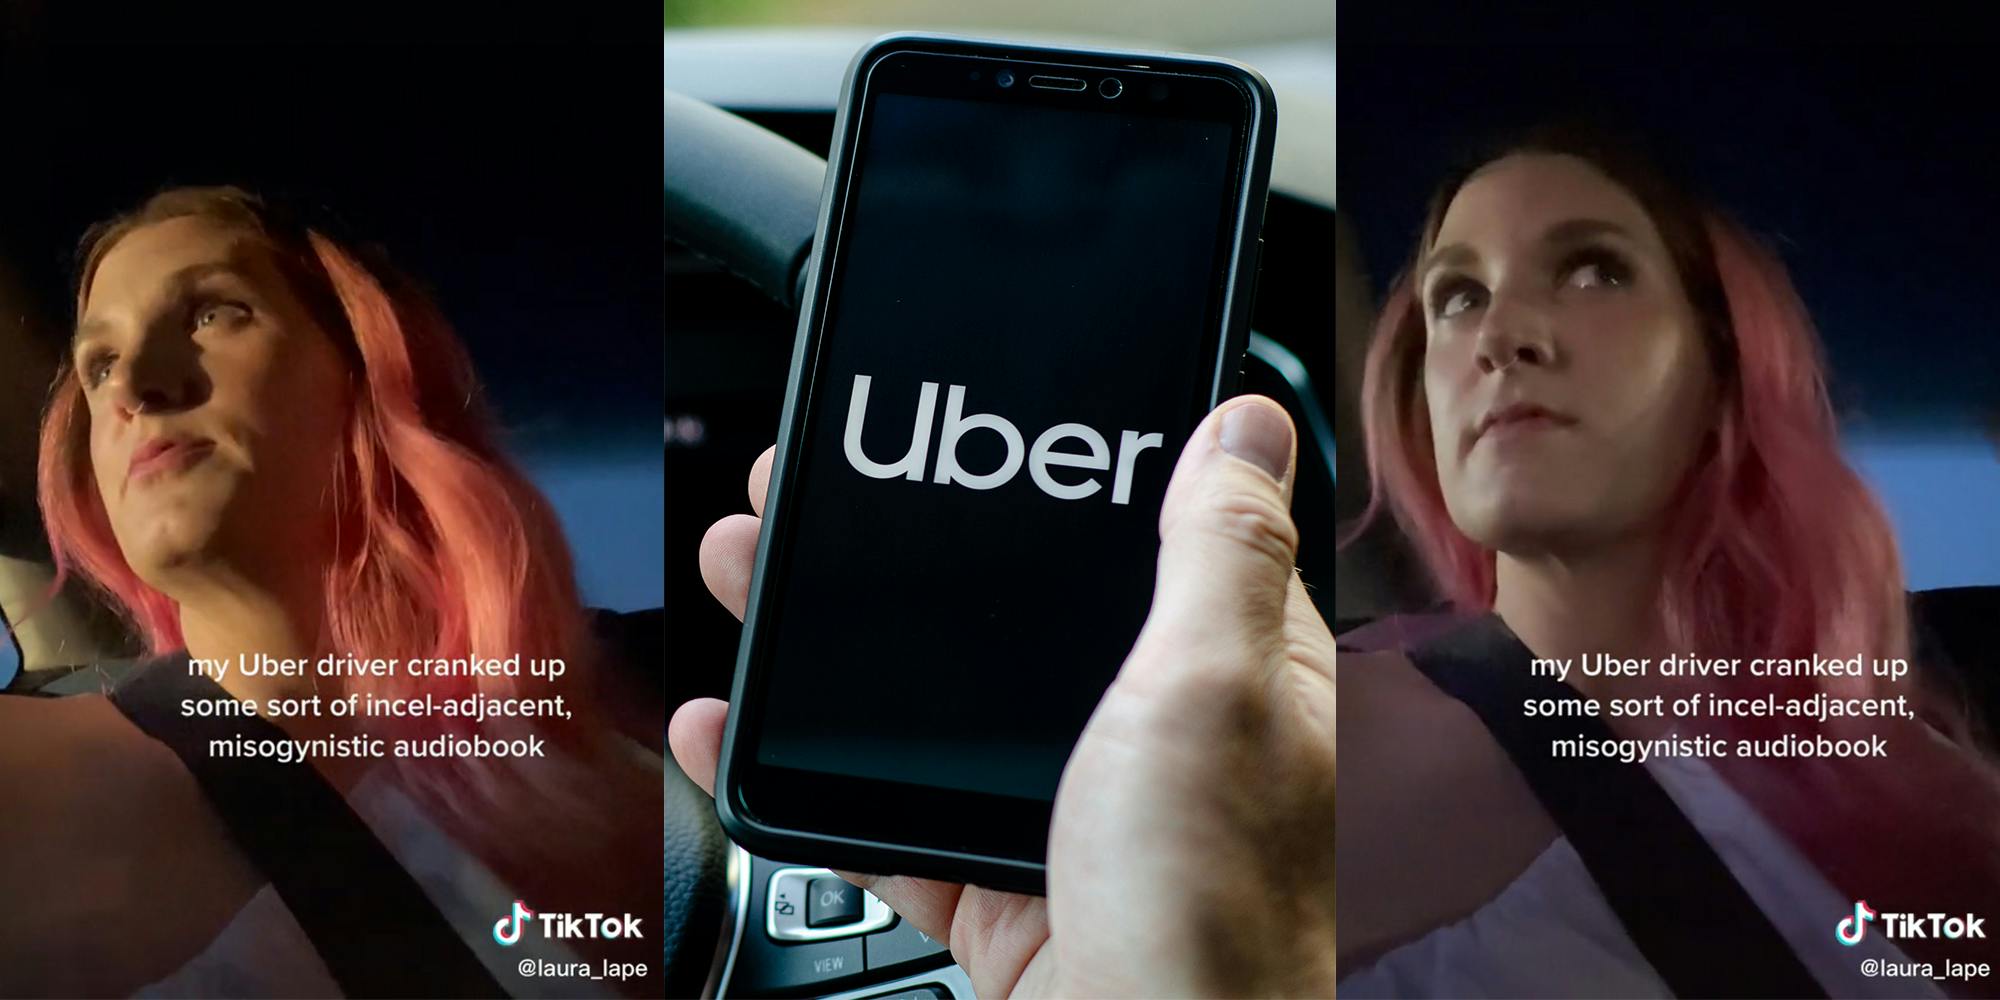 woman in car with caption "my Uber driver cranked up some sort of incel-adjacent, misogynistic audiobook" (l&r) hand holding phone with Uber logo (c)